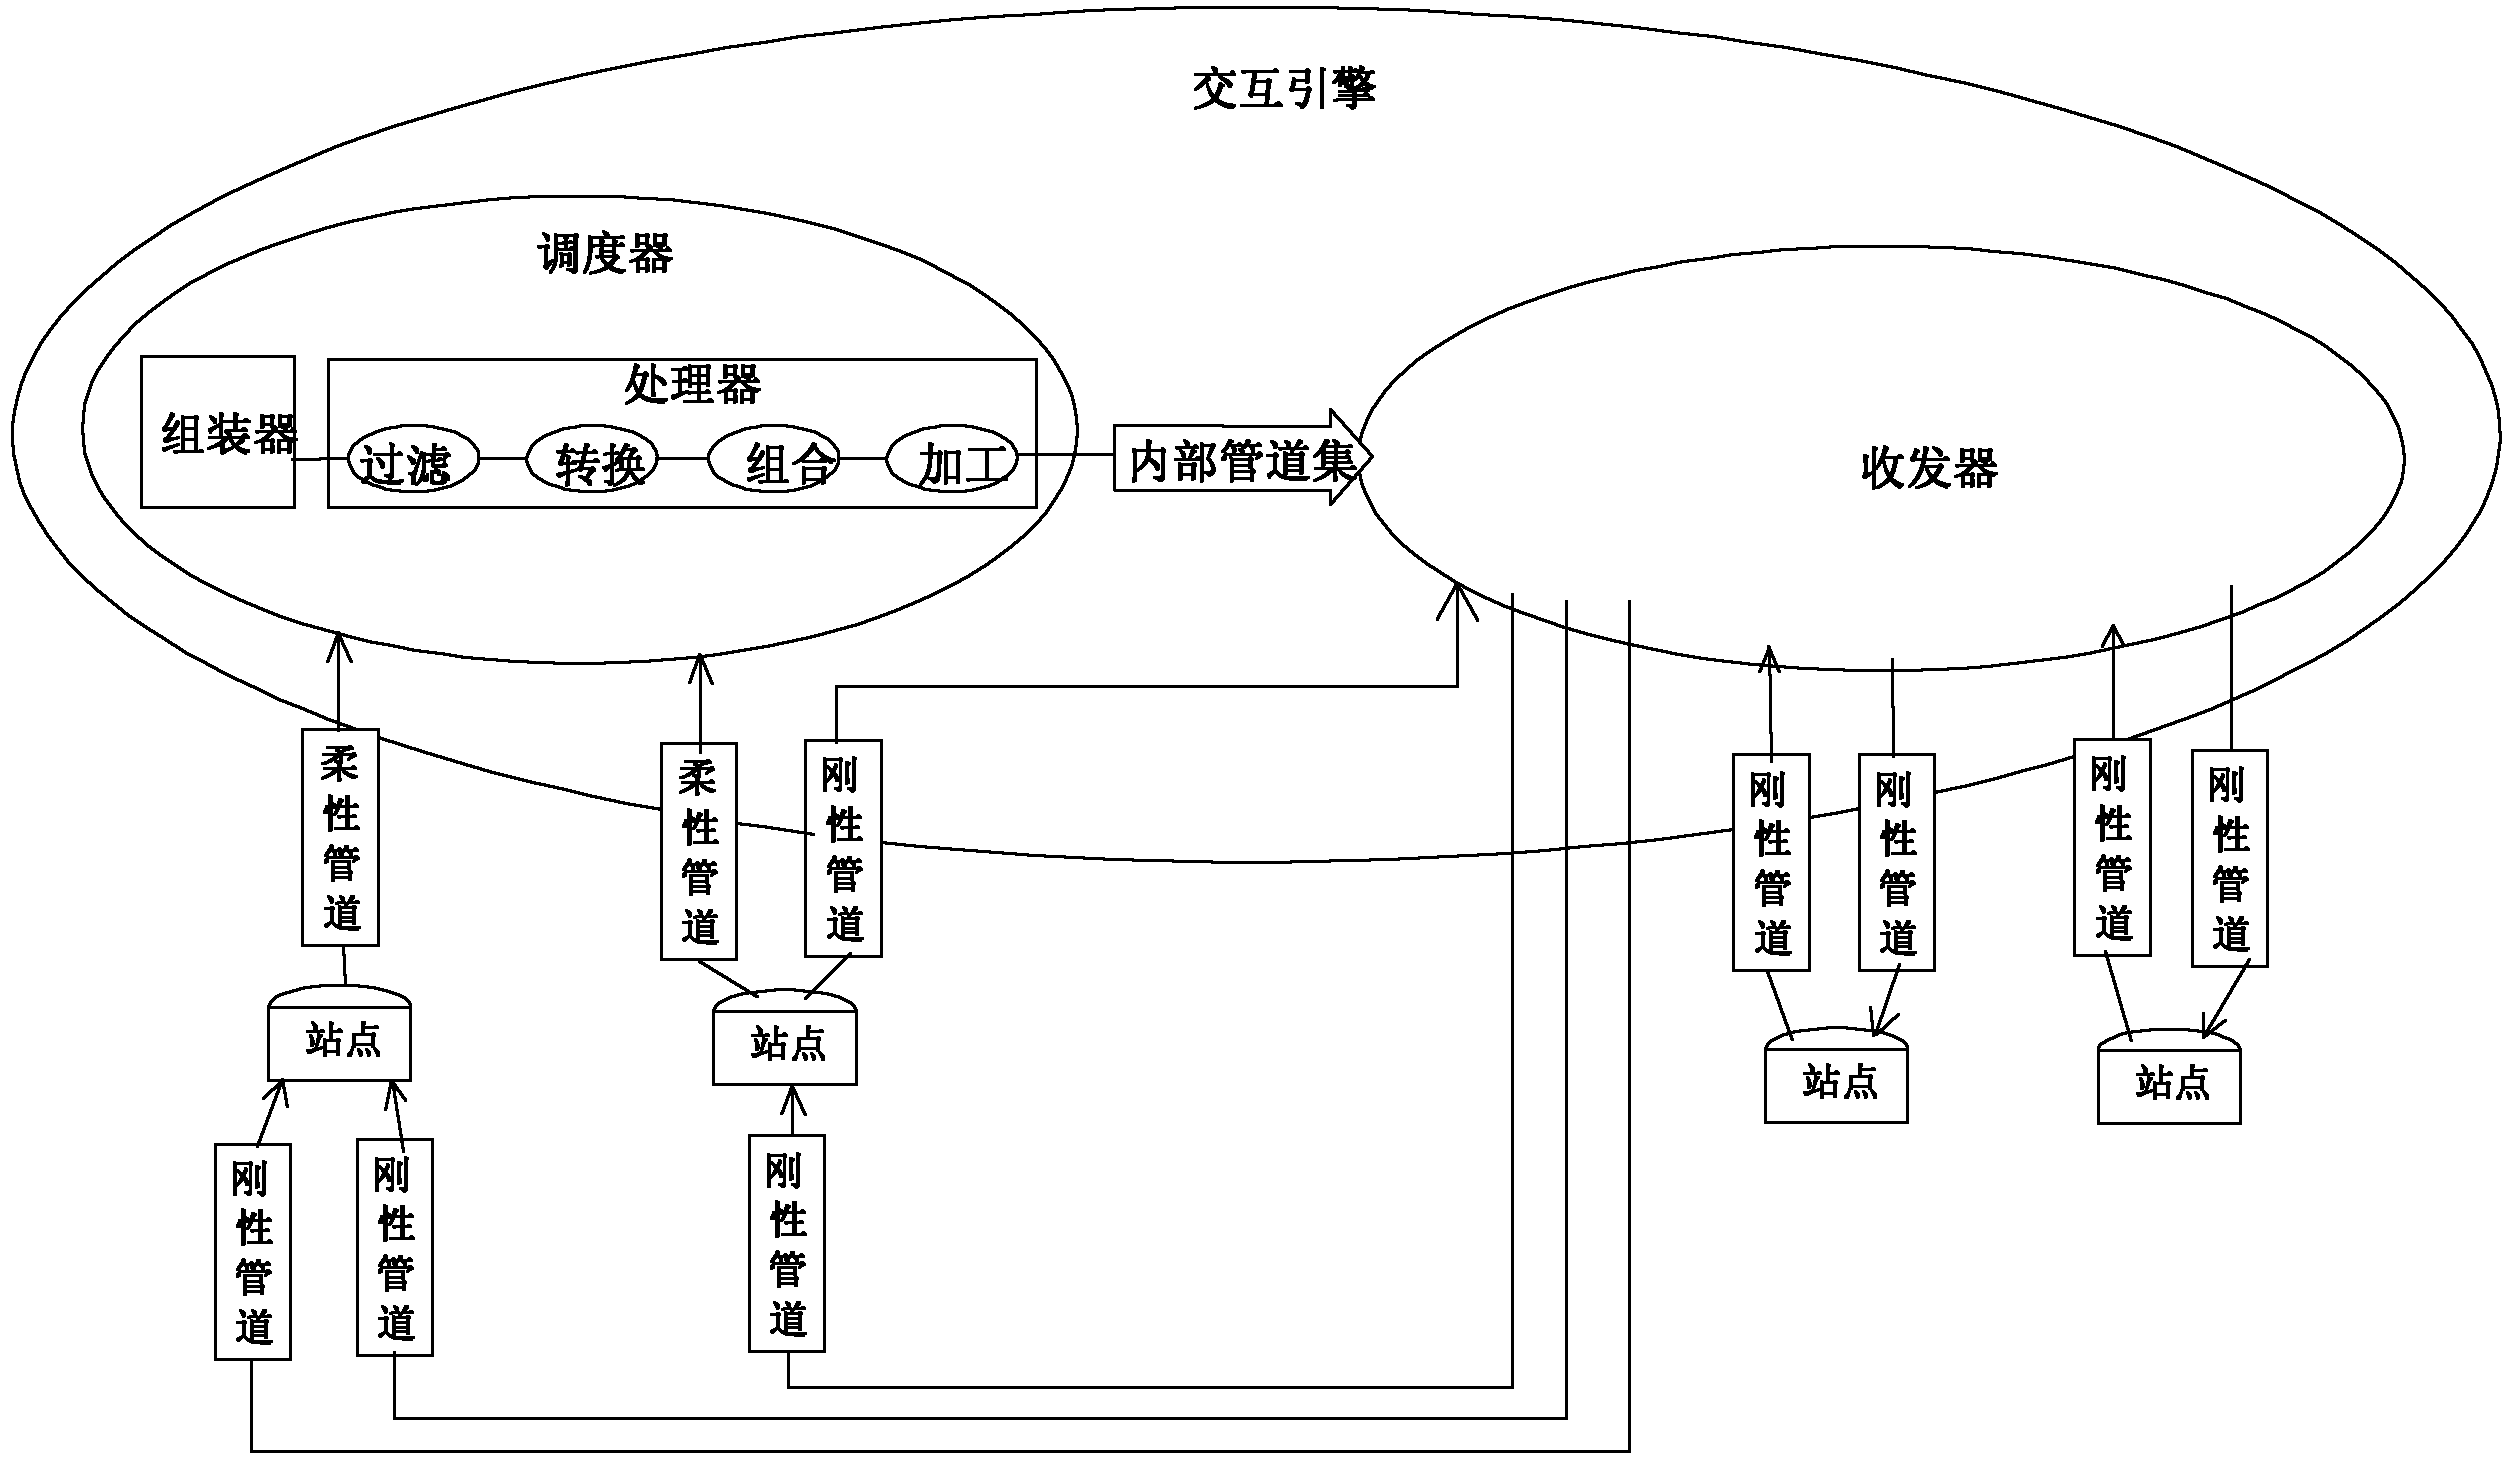 Computer system constructing method based on data interactive fusion